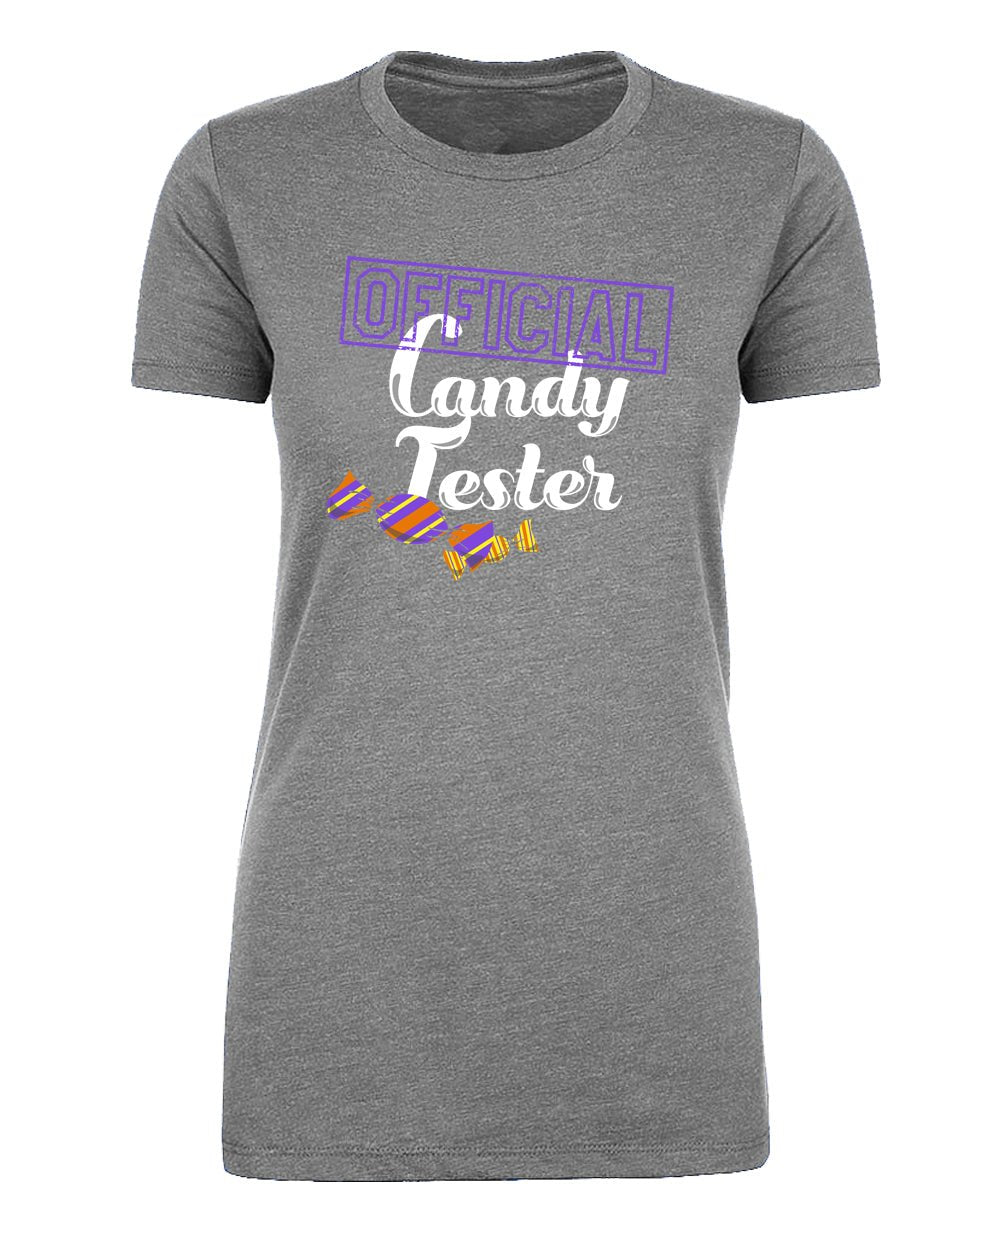 Official Candy Tester Womens Halloween T Shirts - Mato & Hash